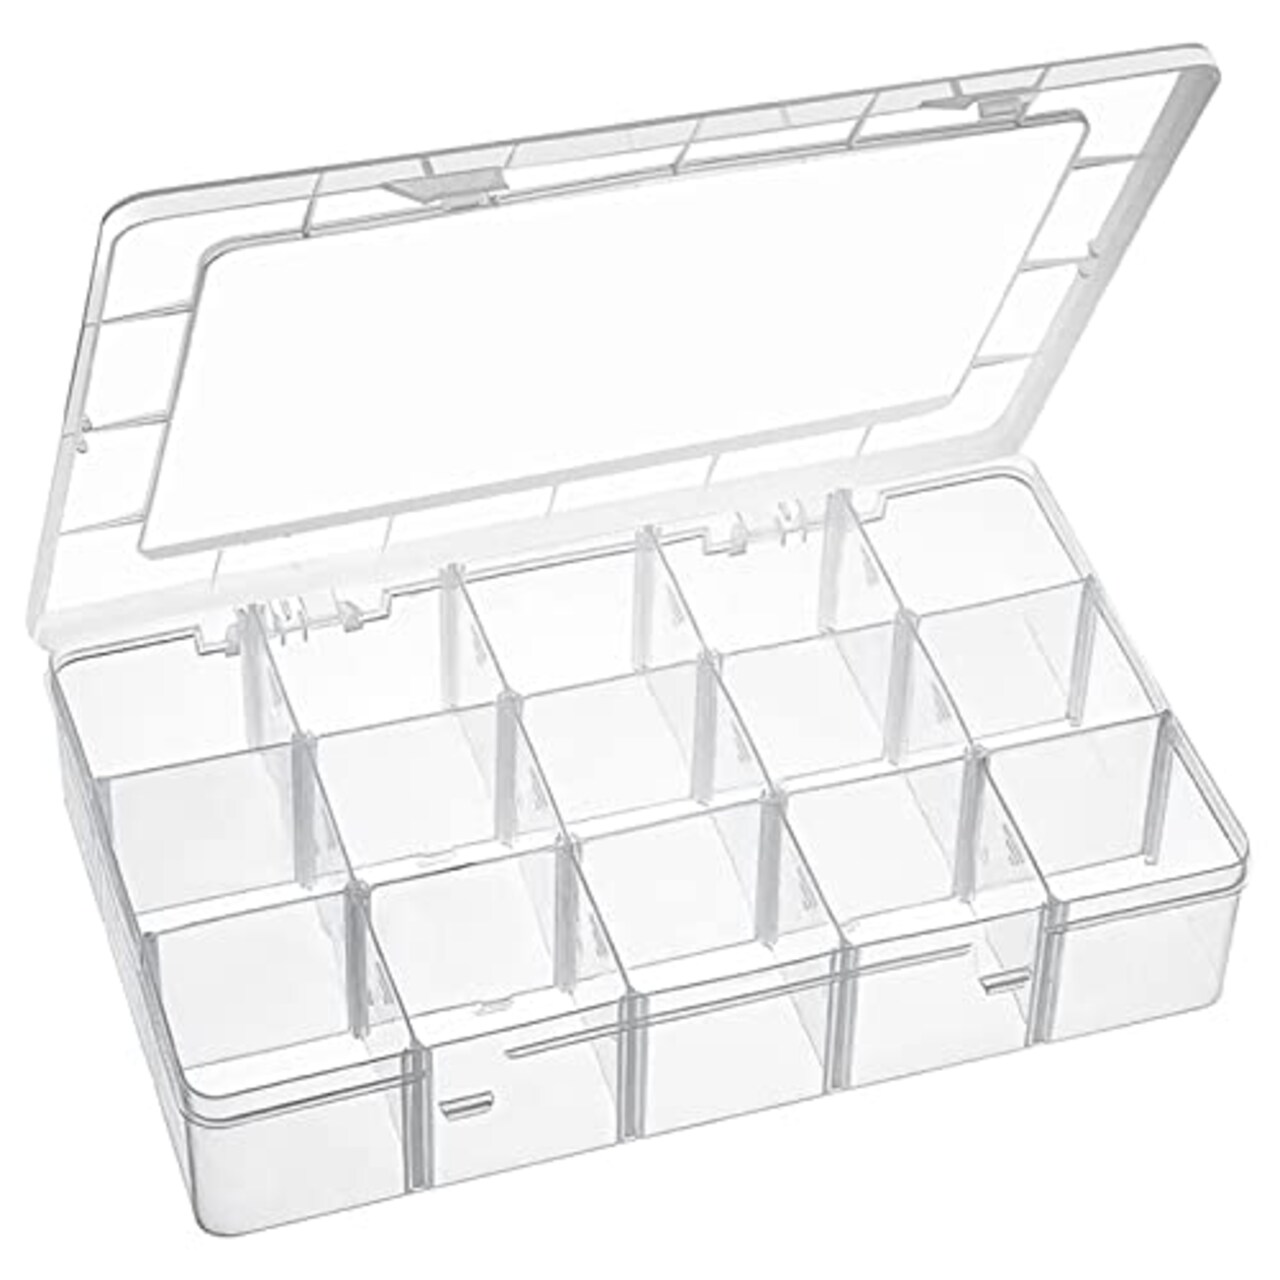 15 Large Grids Plastic Organizer Box with Dividers, Exptolii Clear